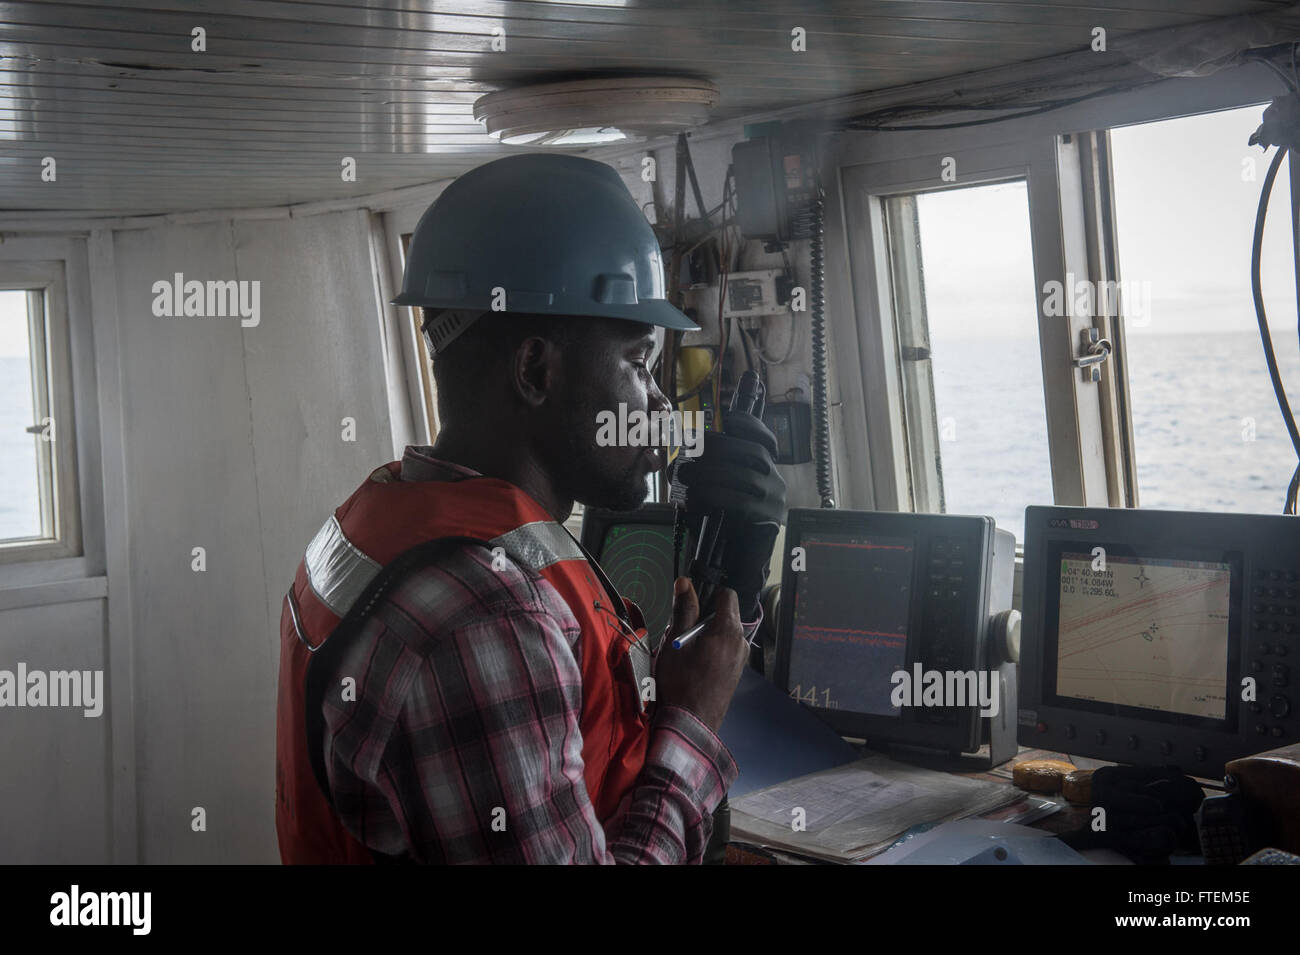 ATLANTIC OCEAN (Feb. 23, 2015) An embarked Ghanaian police officer communicates with the Military Sealift Command’s joint high-speed vessel USNS Spearhead (JHSV 1) from a boarded fishing vessel during Africa Maritime Law Enforcement Partnership Feb. 23, 2015. Spearhead is on a scheduled deployment to the U.S. 6th Fleet area of operations in support of the international collaborative capacity-building program Africa Partnership Station. Stock Photo